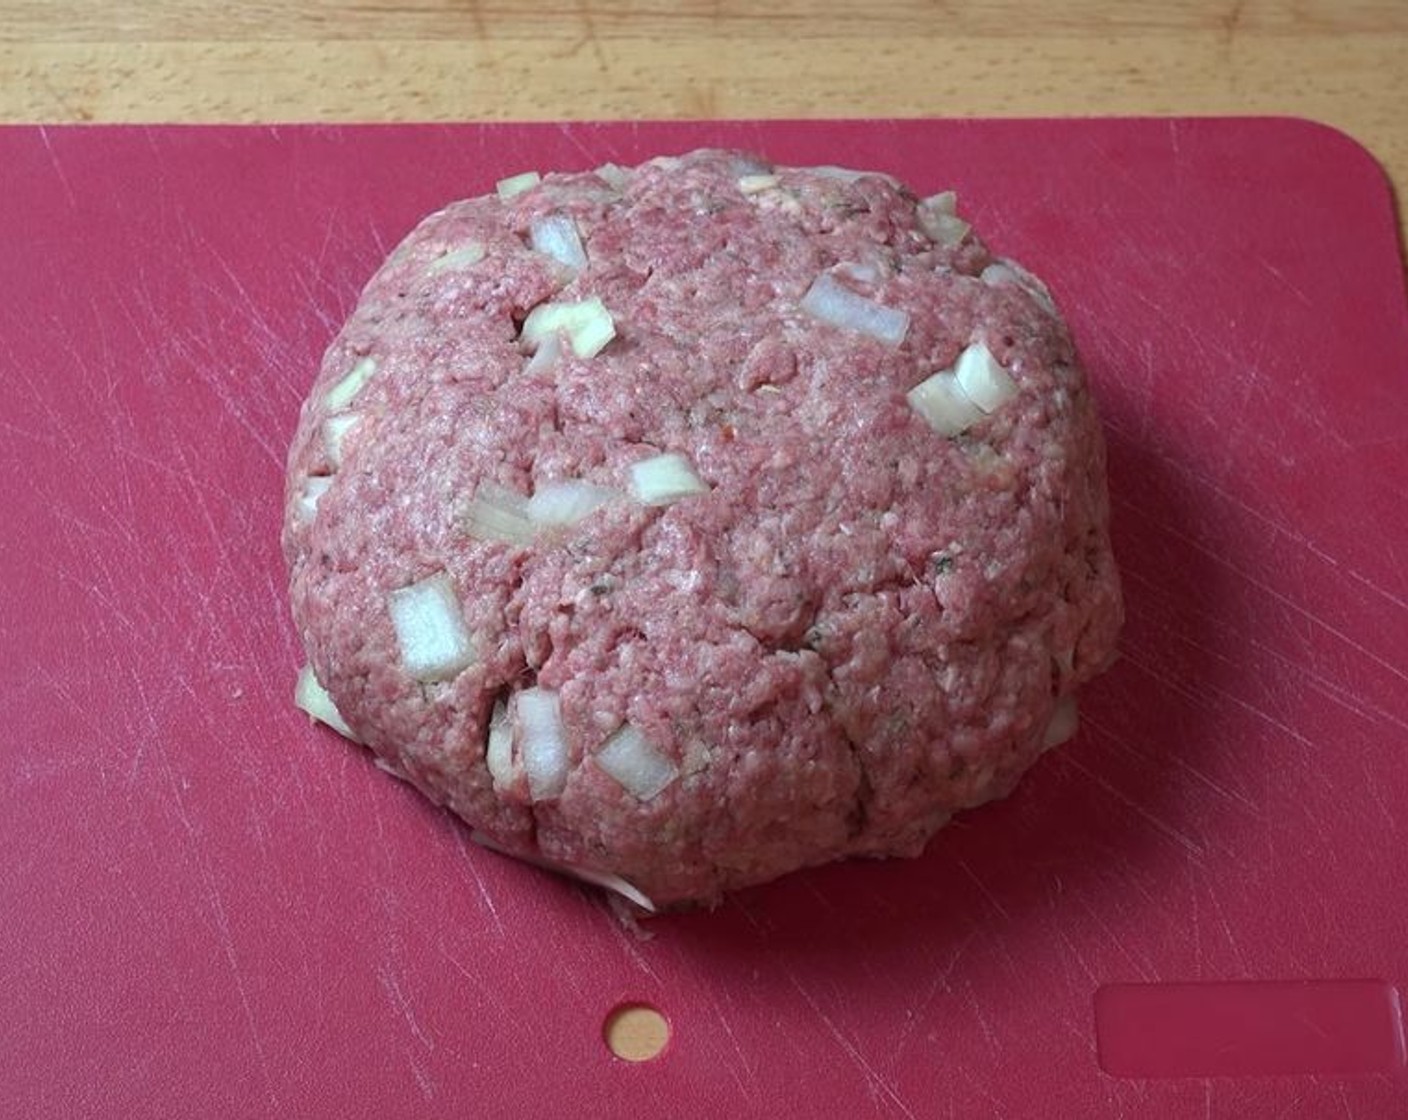 step 2 Into a mixing bowl, add Lean Ground Beef (1.1 lb), Yellow Onion (1/2), Garlic (2 cloves), Egg (1), Italian Seasoning (1/2 Tbsp), and Breadcrumbs (1 1/2 cups). Using your hands, mix together until well-combined. Form the meat mixture into a disk shape.